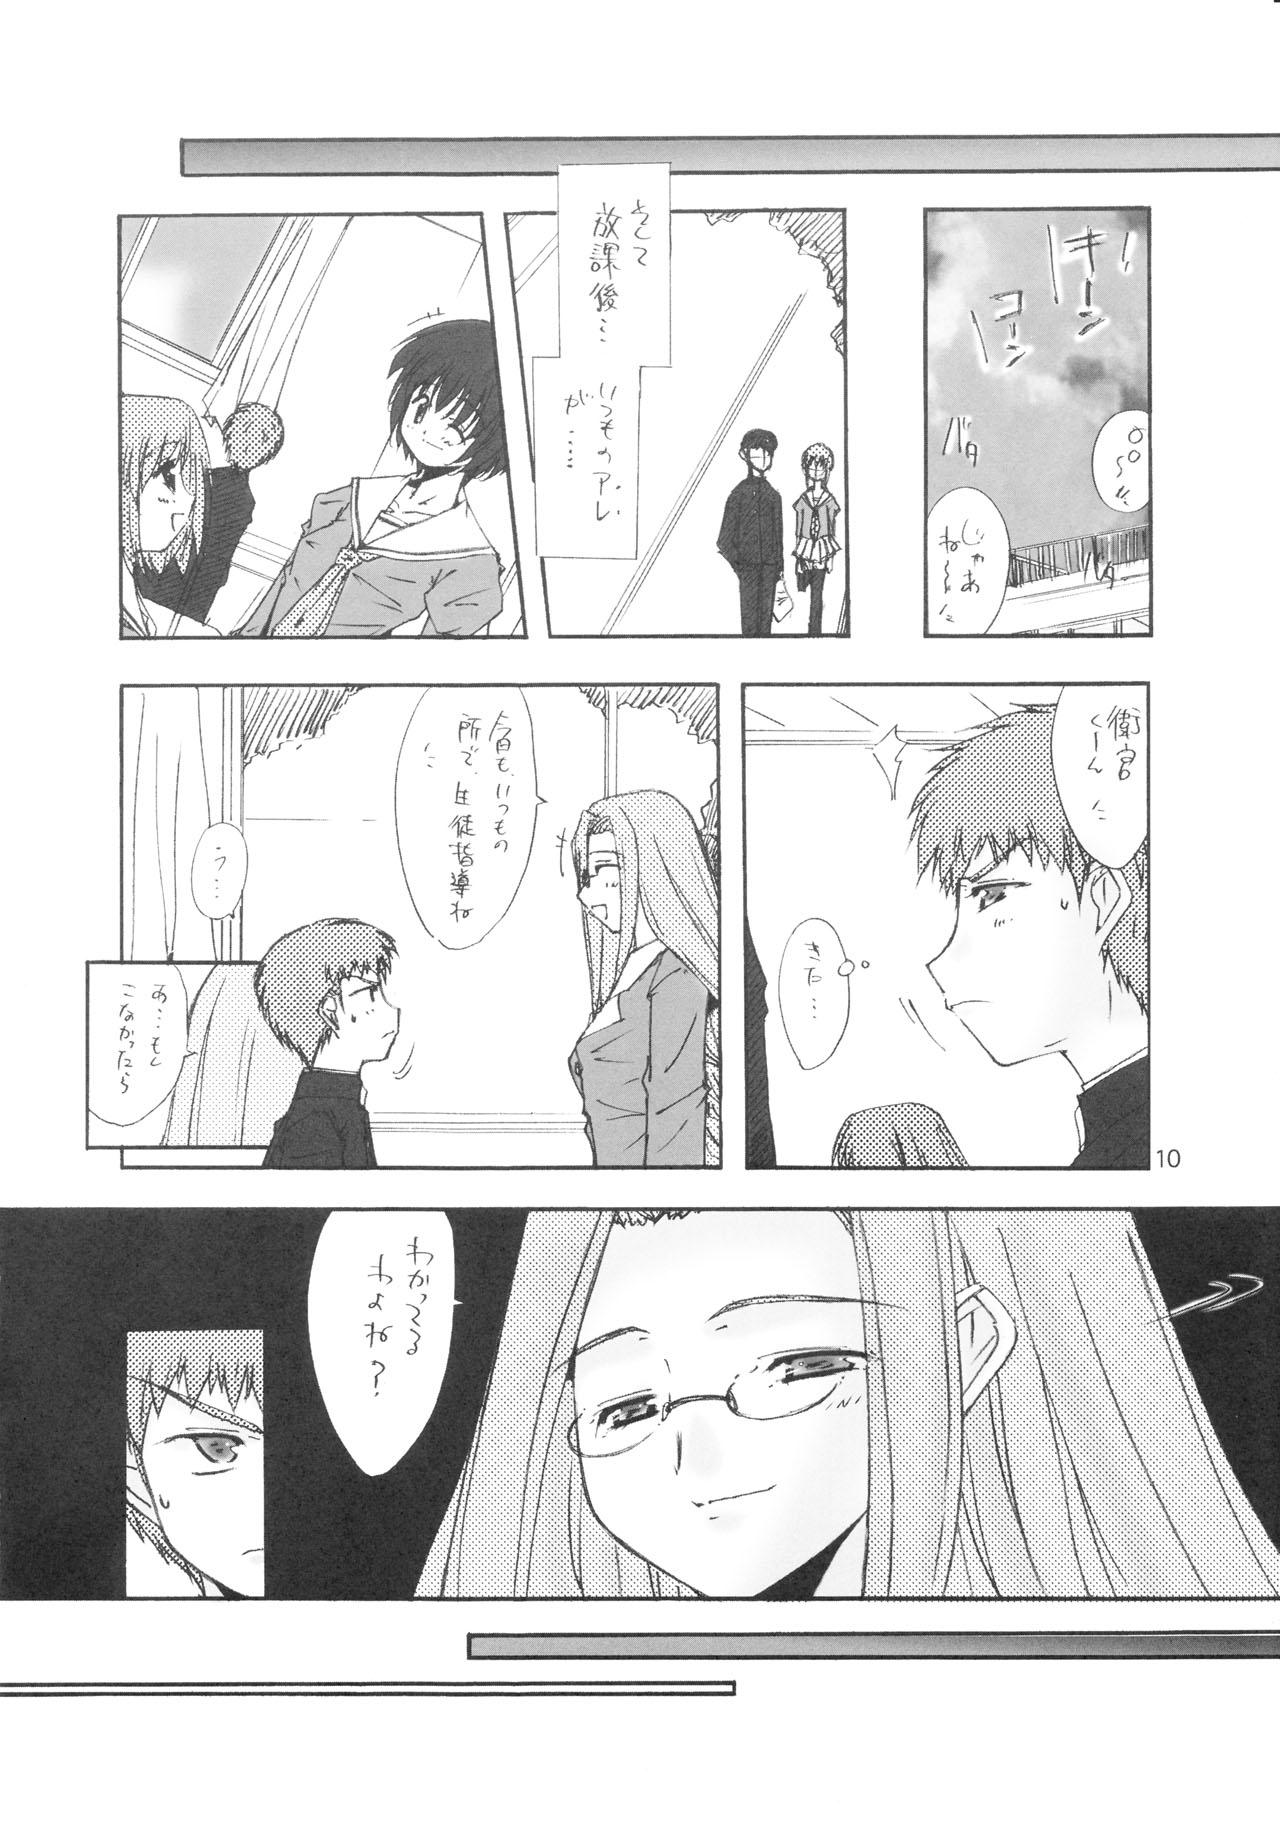 Oil PURPLE DIGNITY - Fate stay night Amador - Page 7